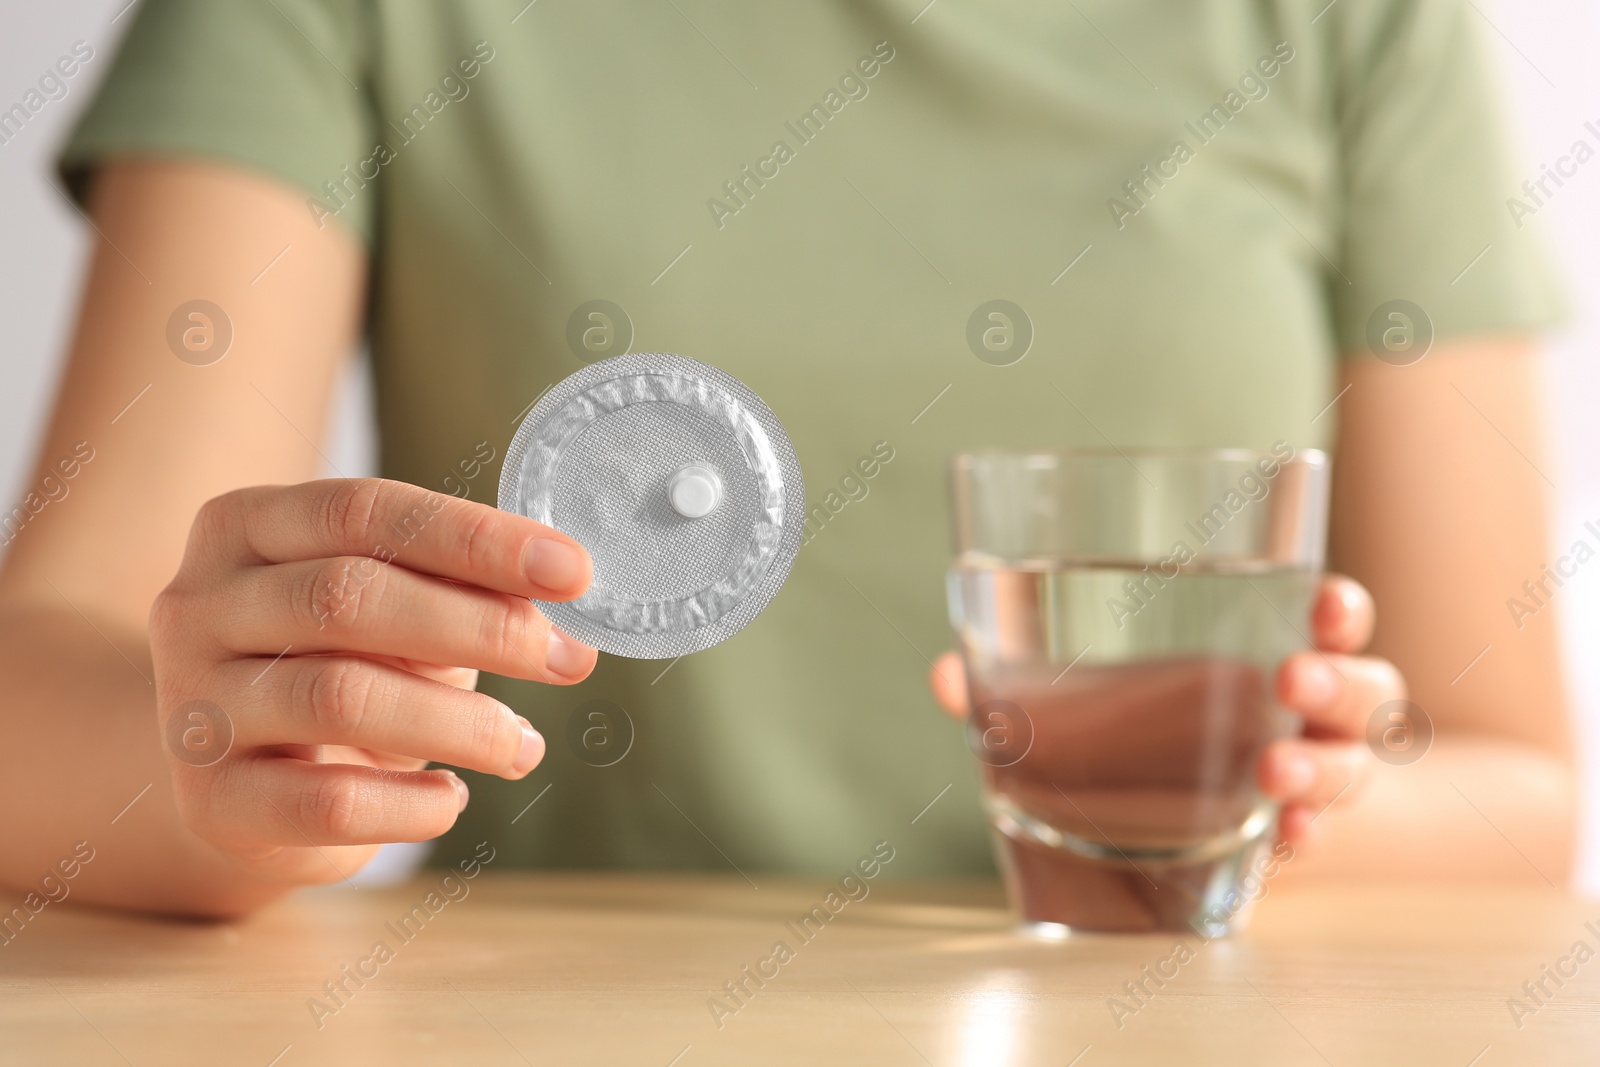 Photo of Woman taking emergency contraception pill at wooden table indoors, focus on hand